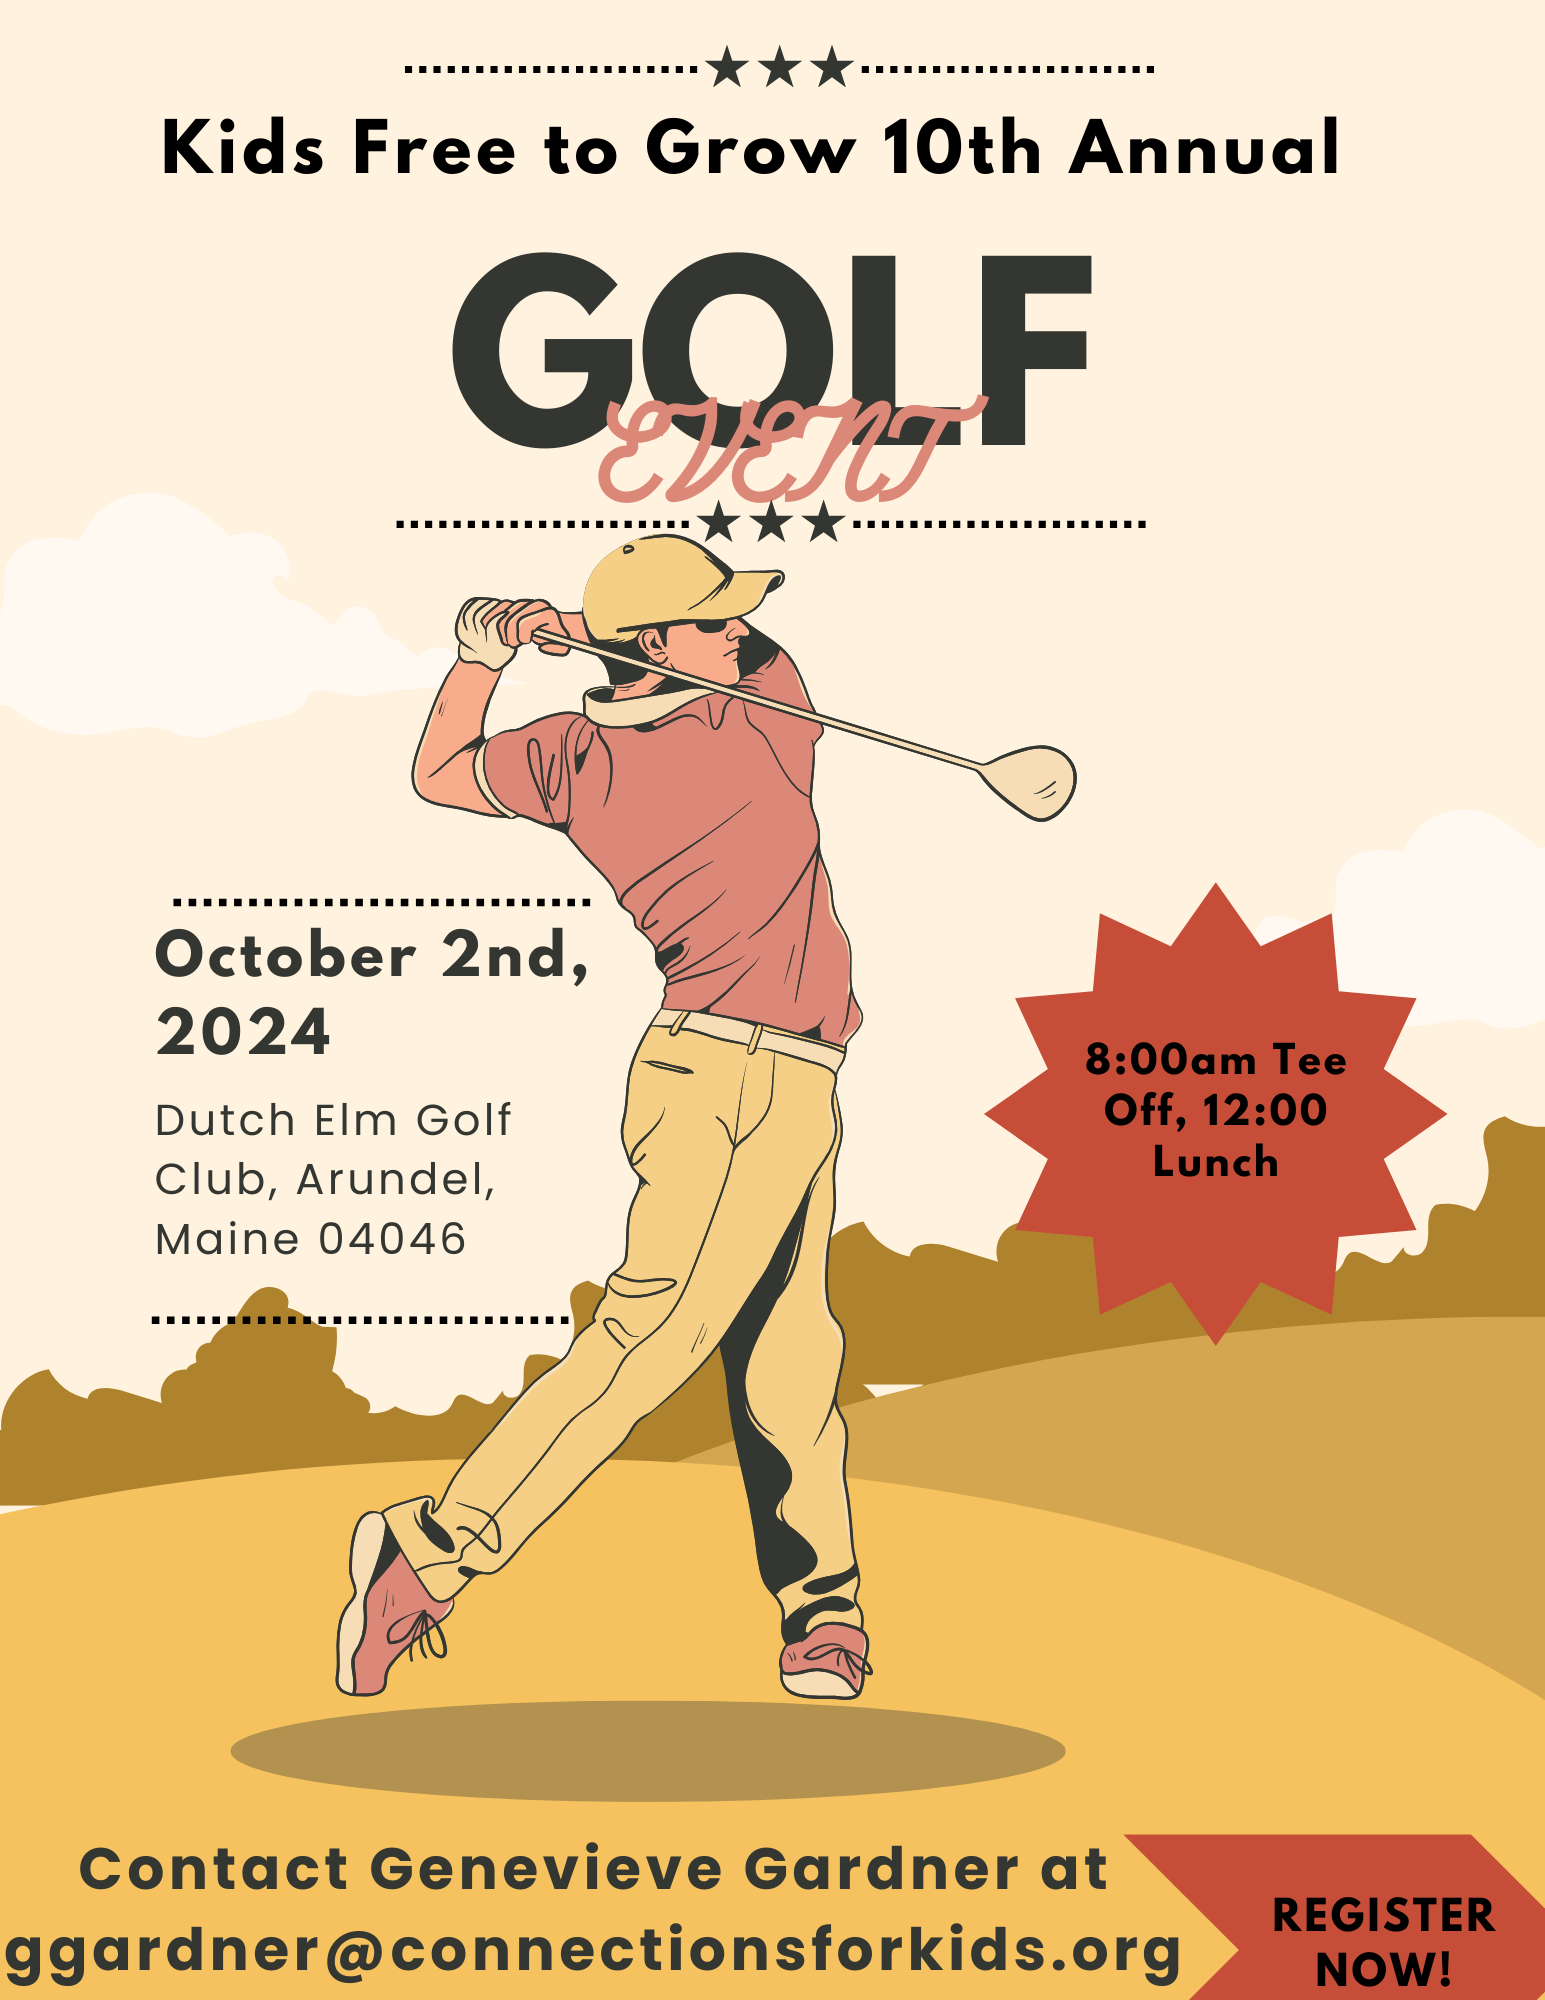 Annual Golf Fundraising Event for Kids Free to Grow! Working towards fighting child abuse and providing parents & children with educational workshops and programs.